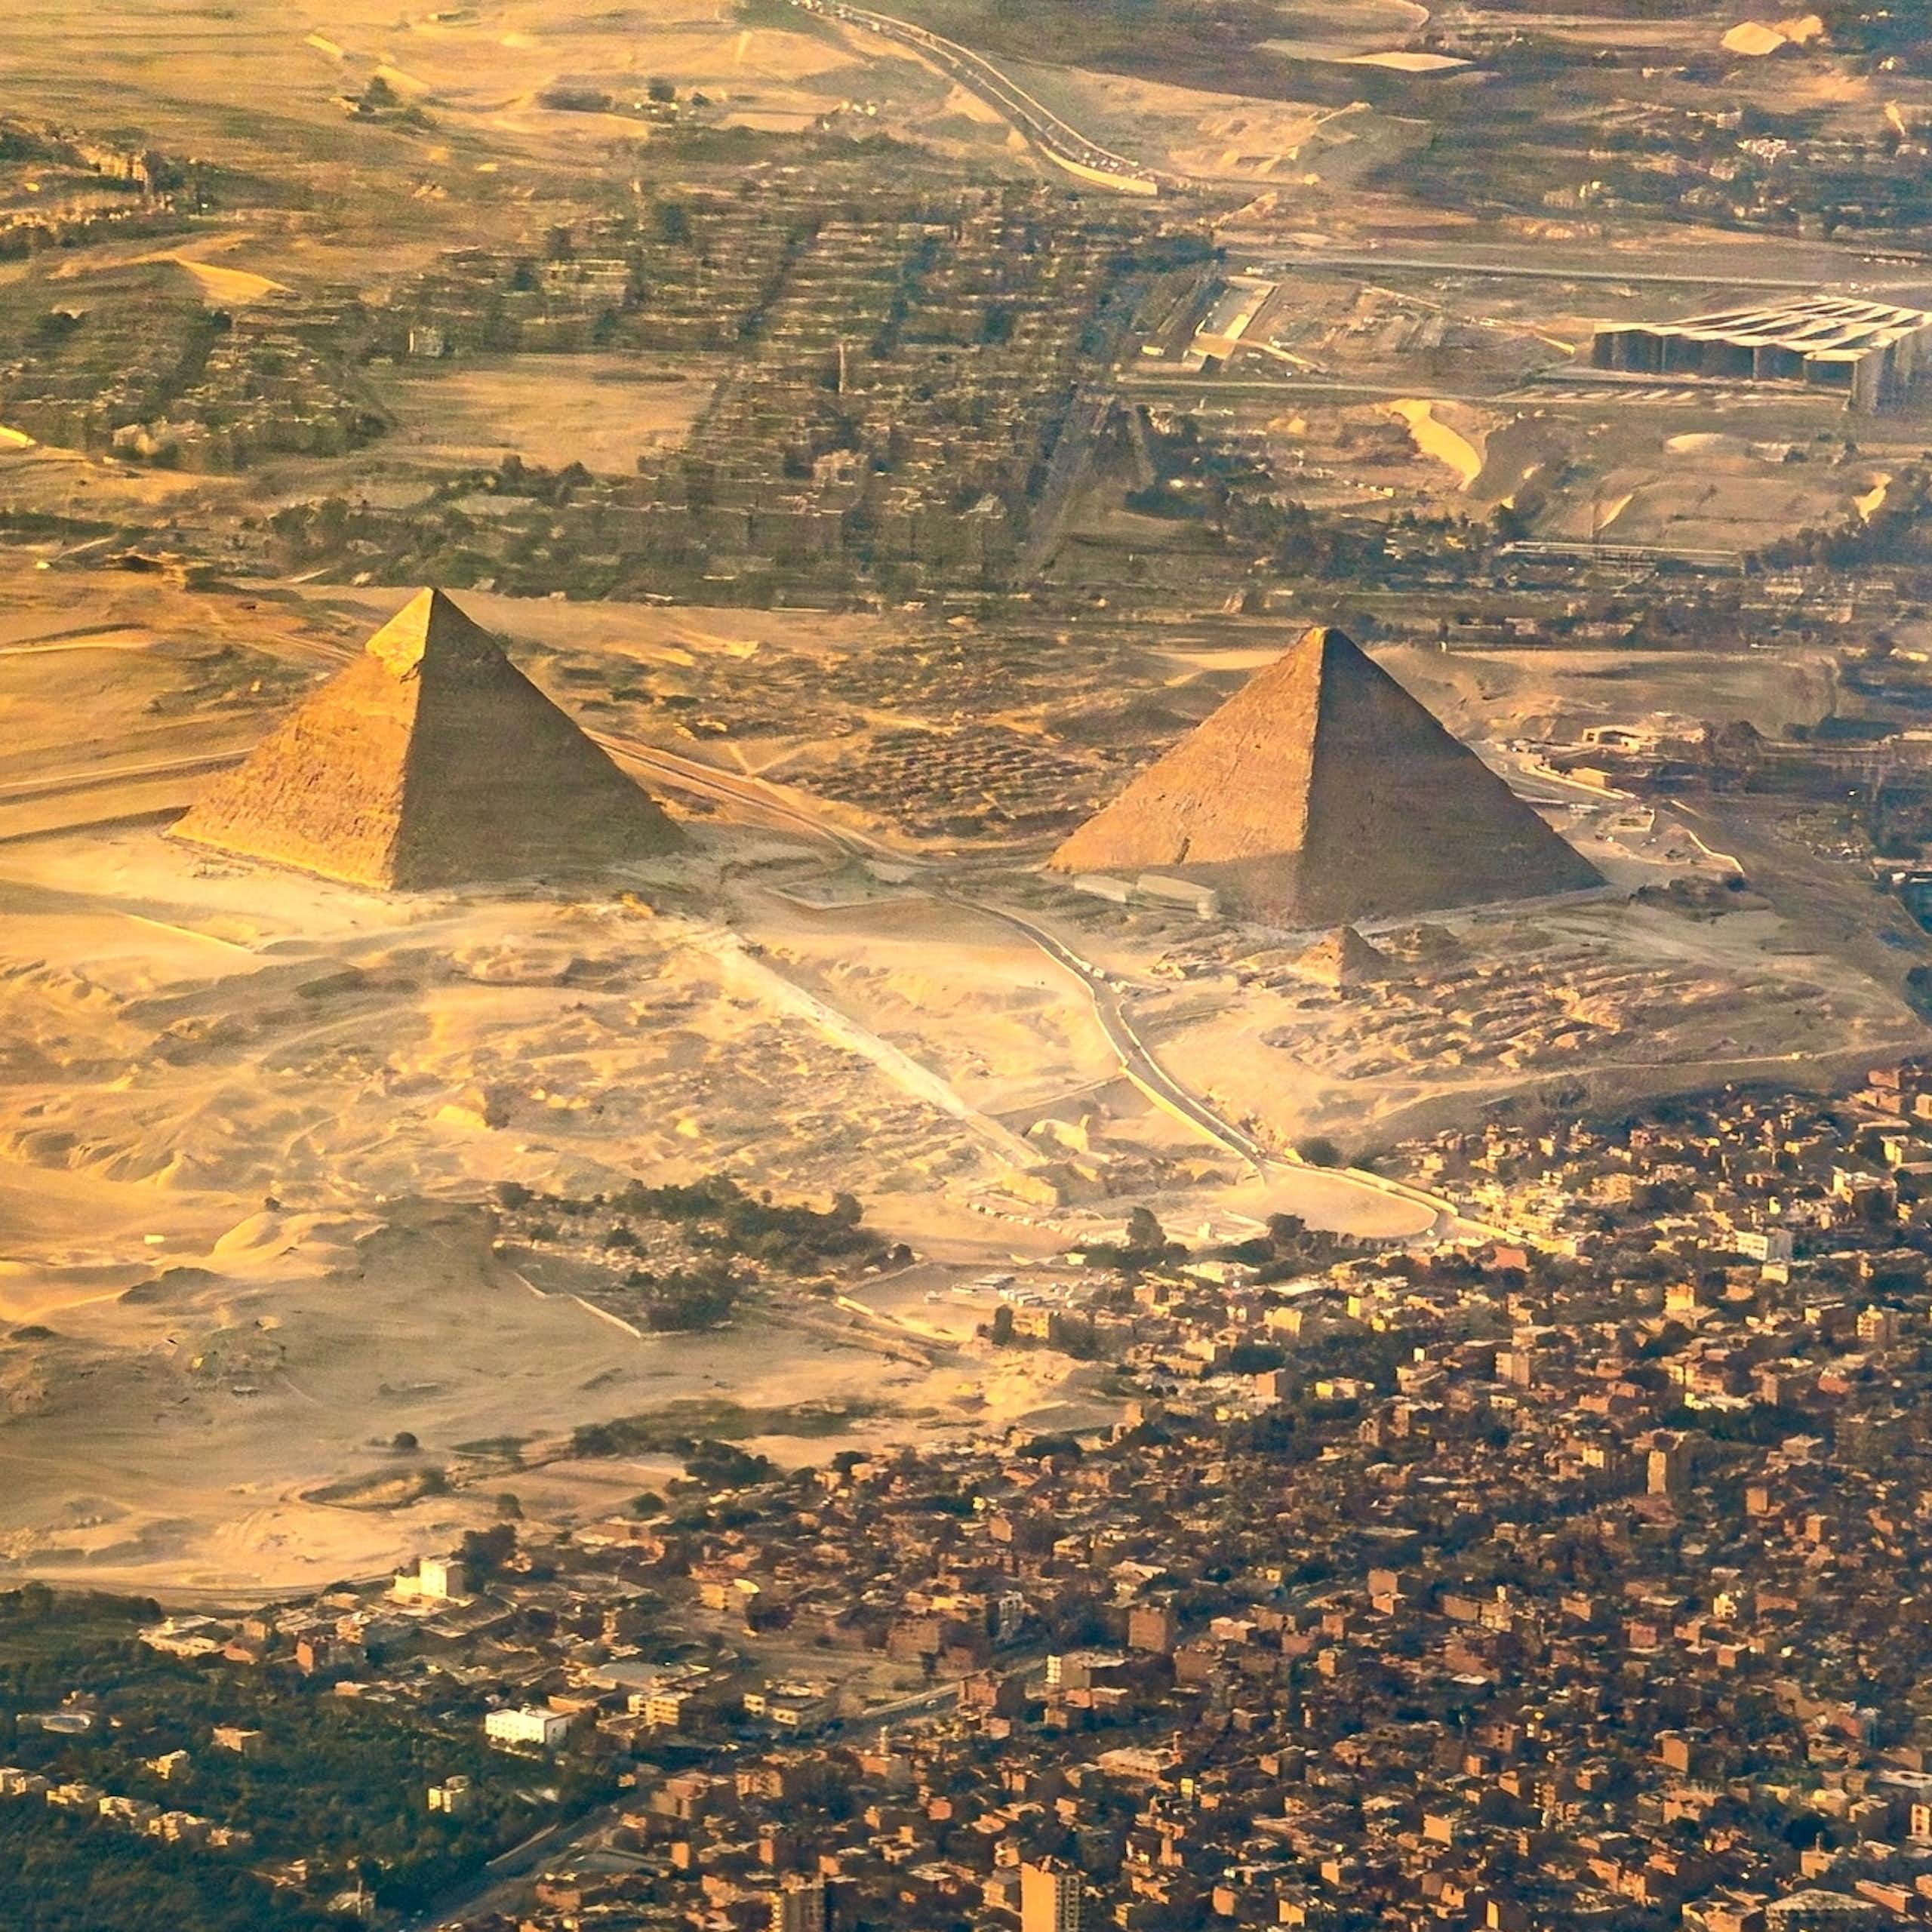 We mapped a lost branch of the Nile River – which may be the key to a longstanding mystery of the pyramids